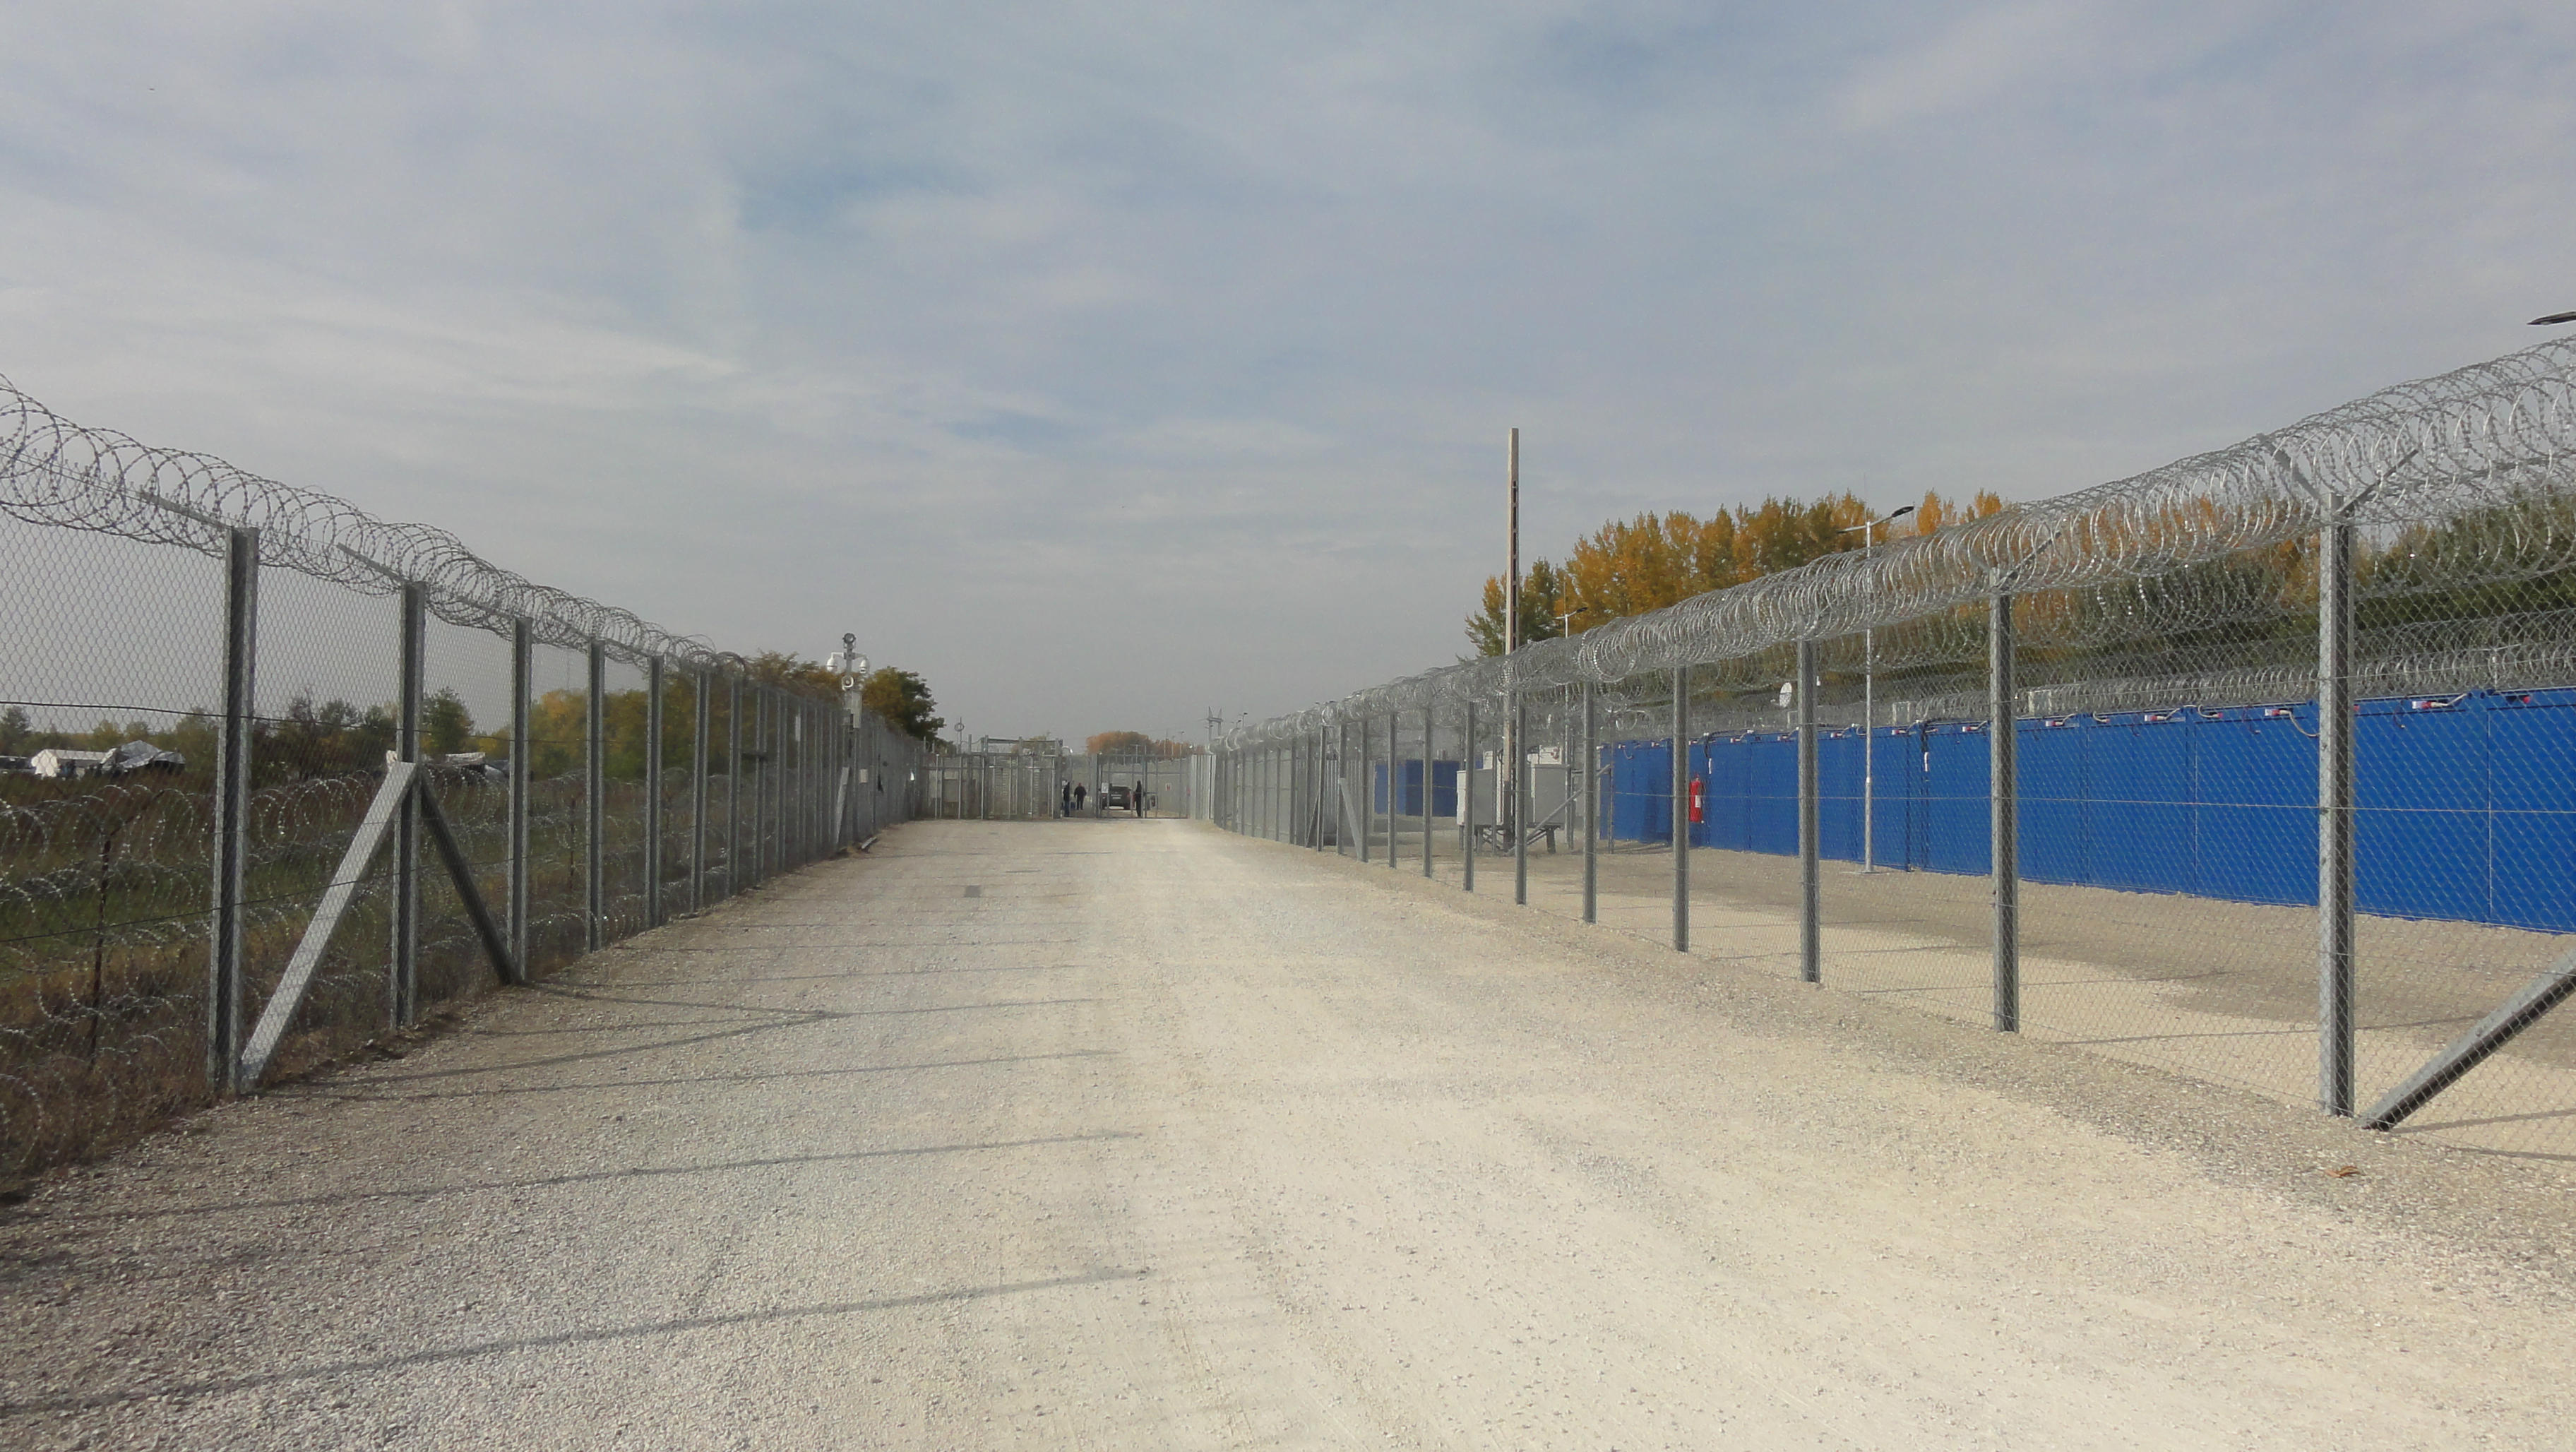 Hungary: anti-torture Committee observed decent conditions in transit zones but criticises treatment of irregular migrants when ‘pushed back’ to Serbia